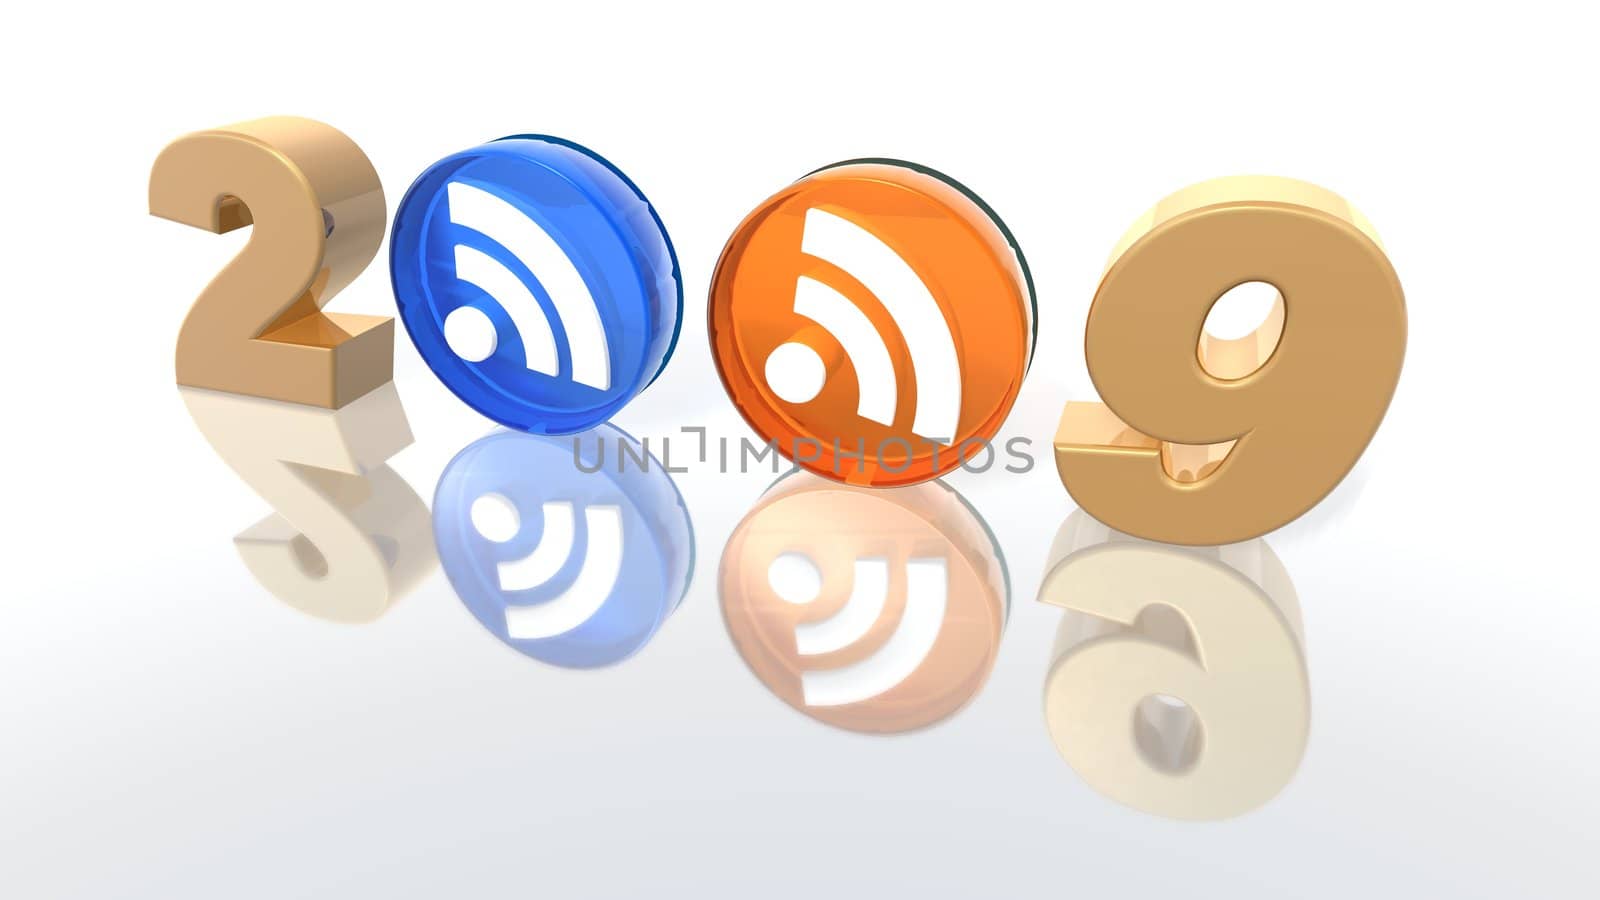 3d rendering to illustrate the new year 2009 with RSS symbols